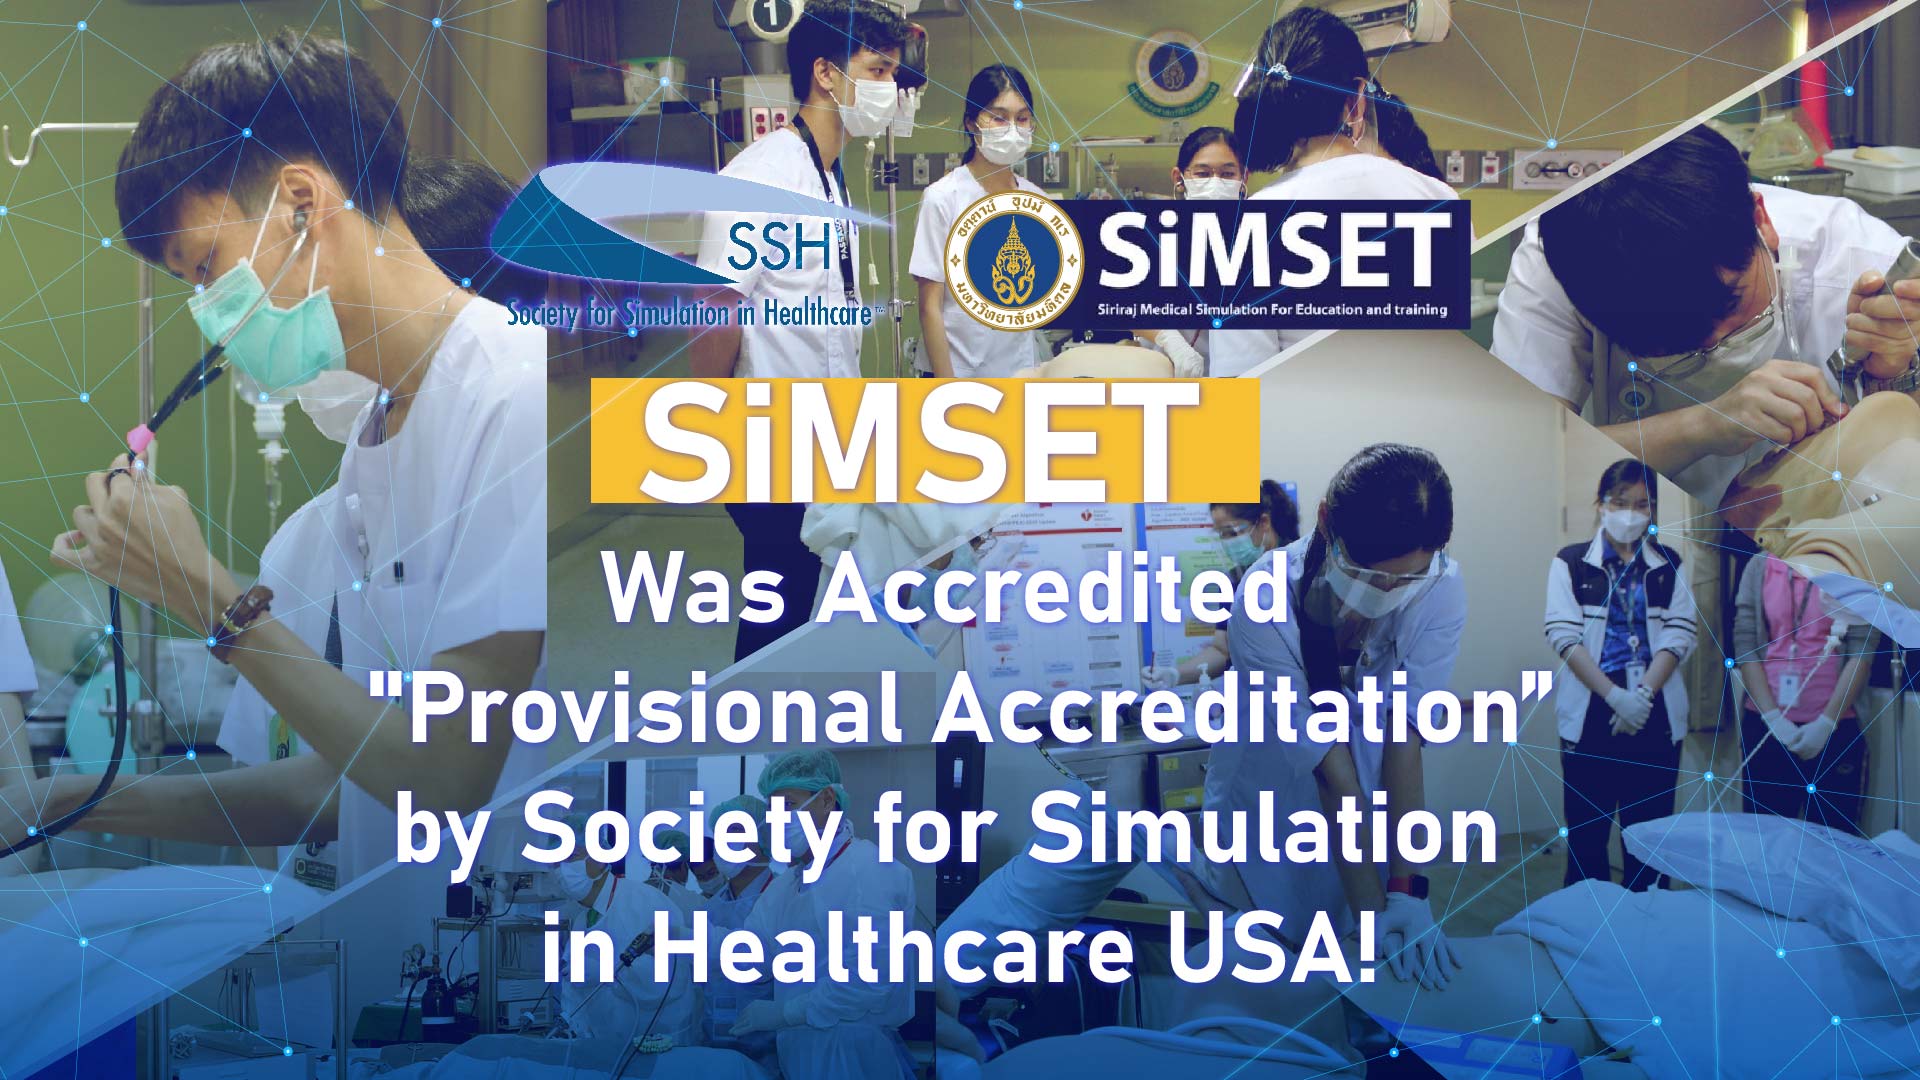 SiMSET Was Accredited by Society for Simulation in Healthcare USA